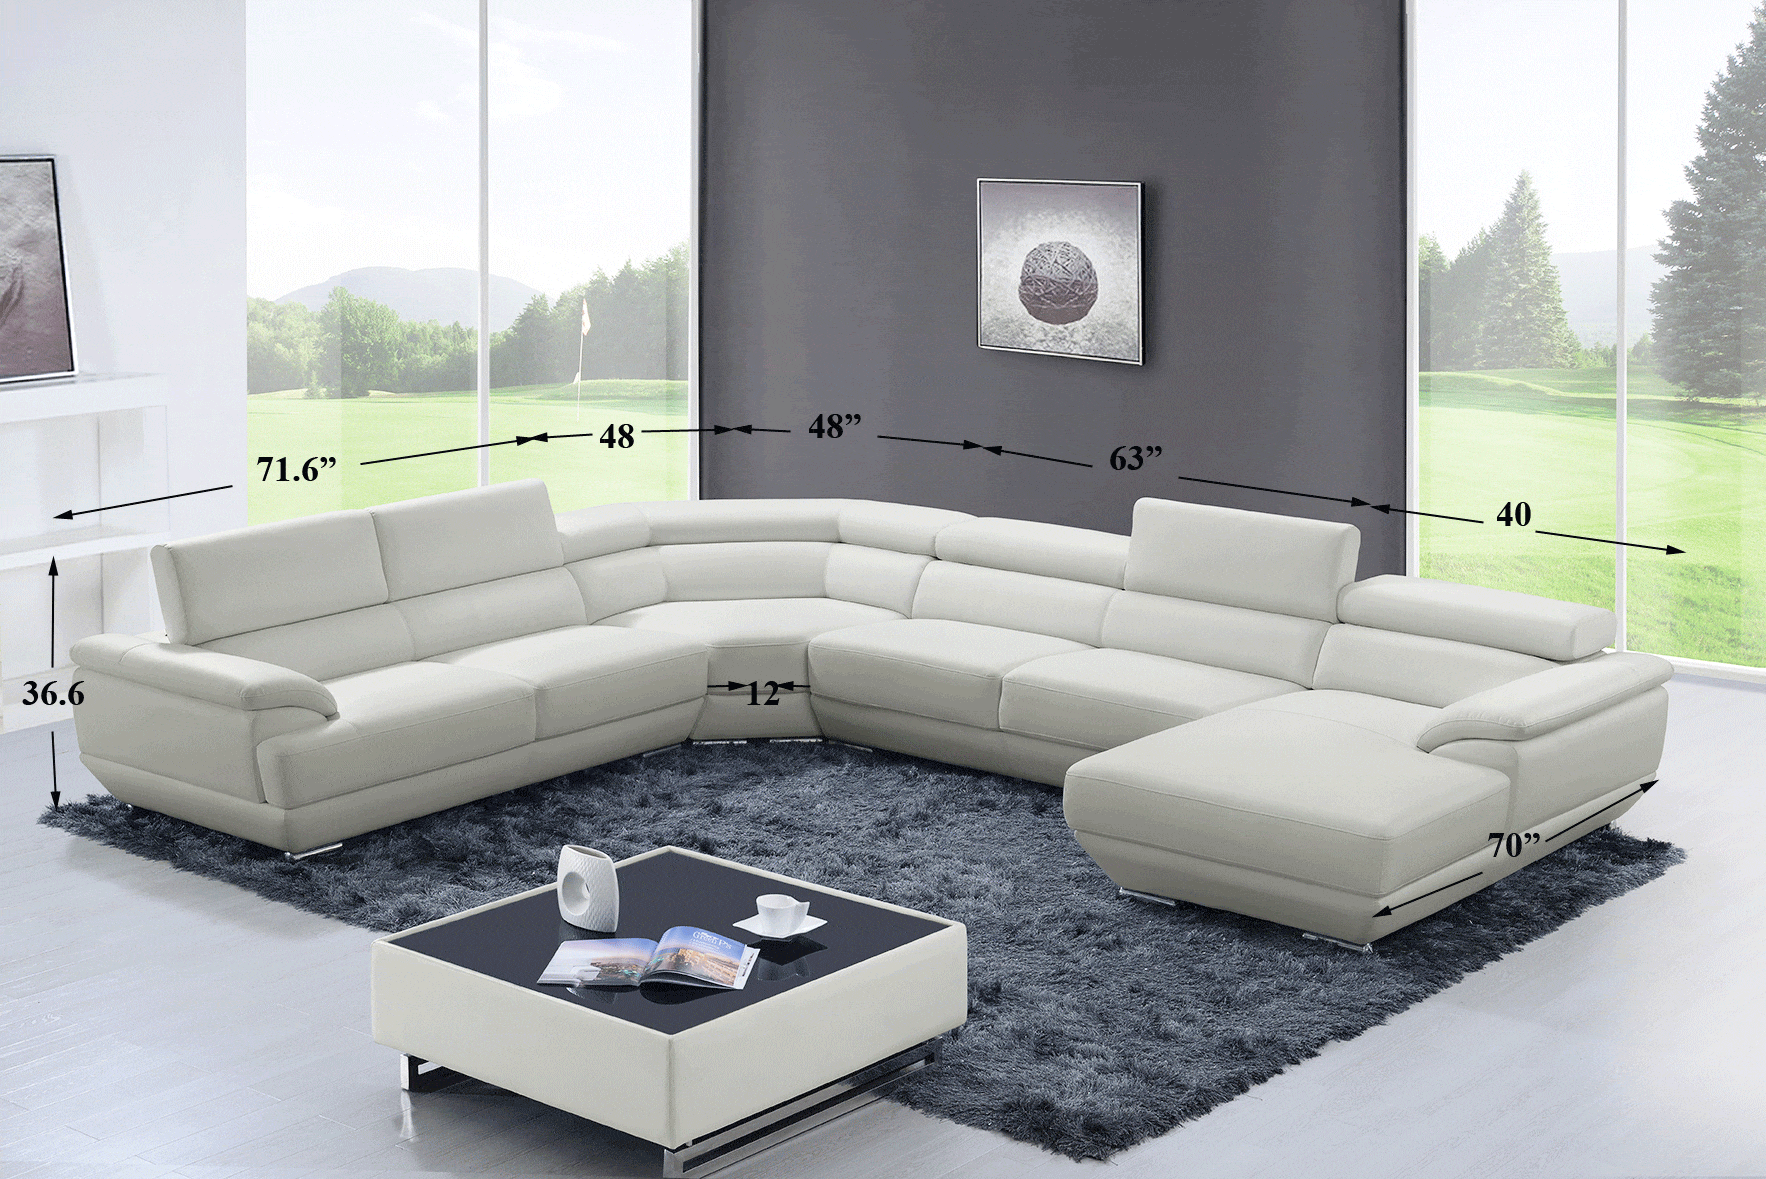 430 Sectional Off White 1 